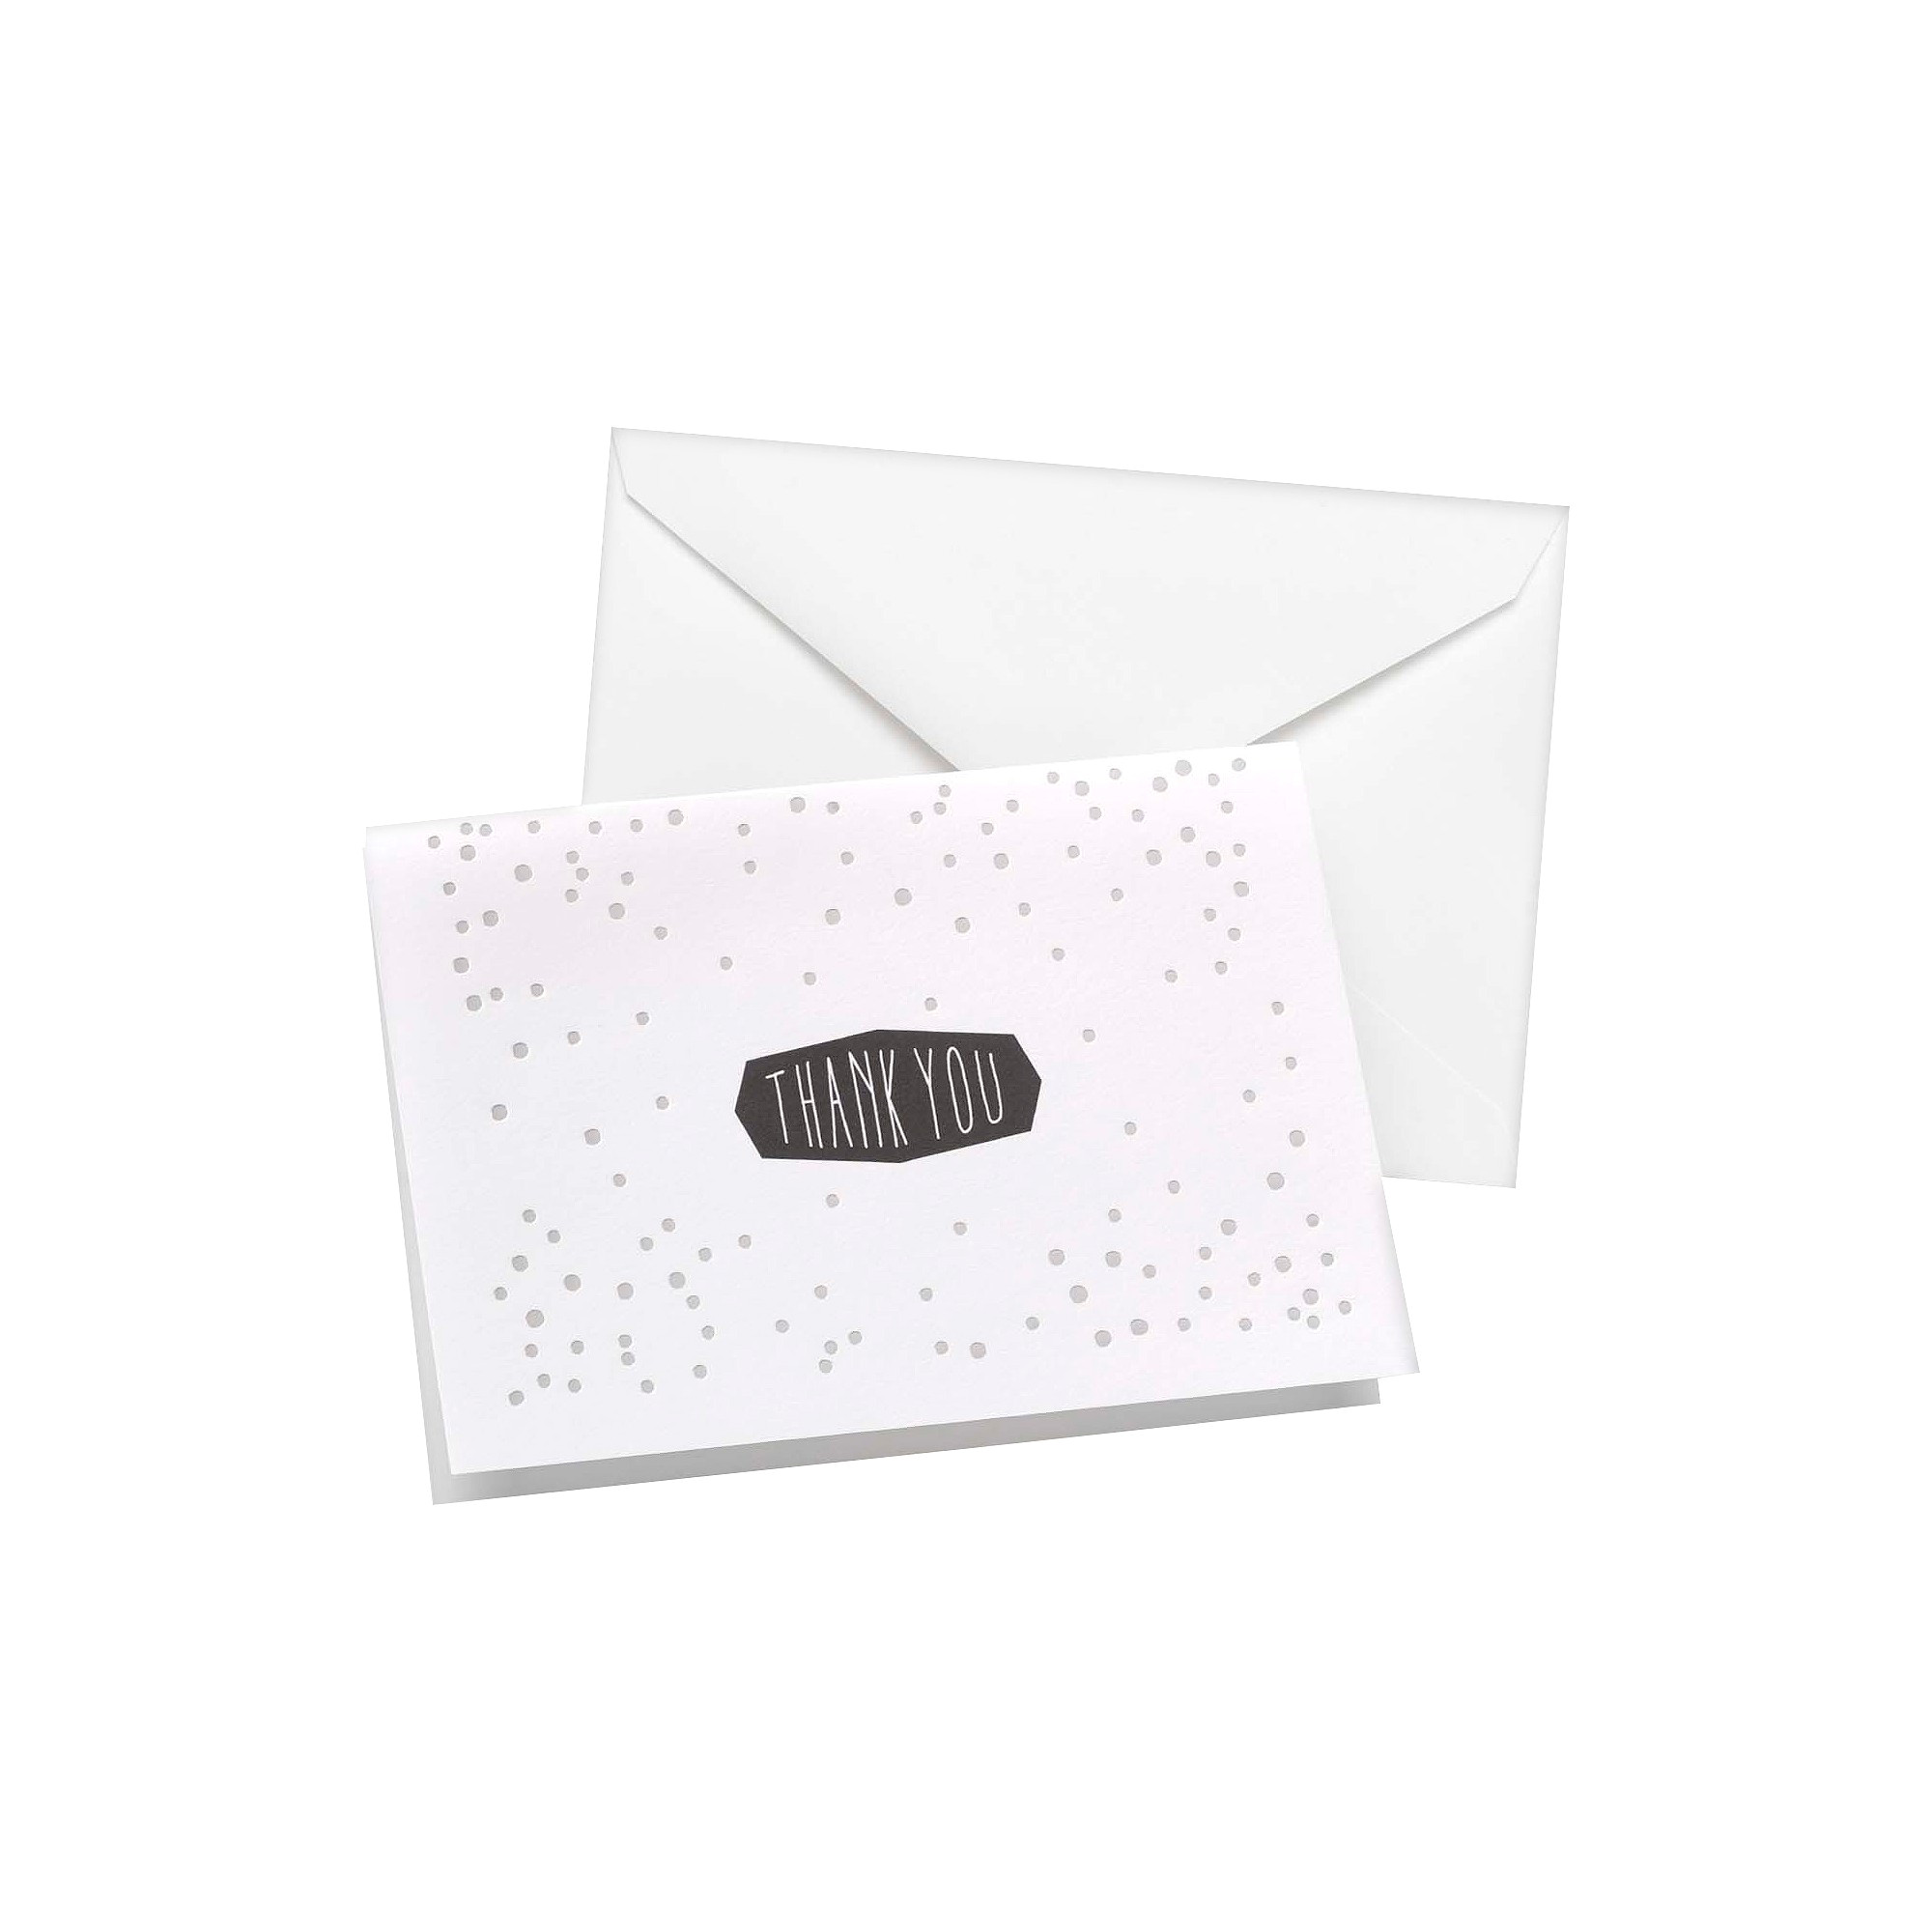 Thank You Card Paper Weight Polka Dot Wedding Collection Thank You Cards Silver